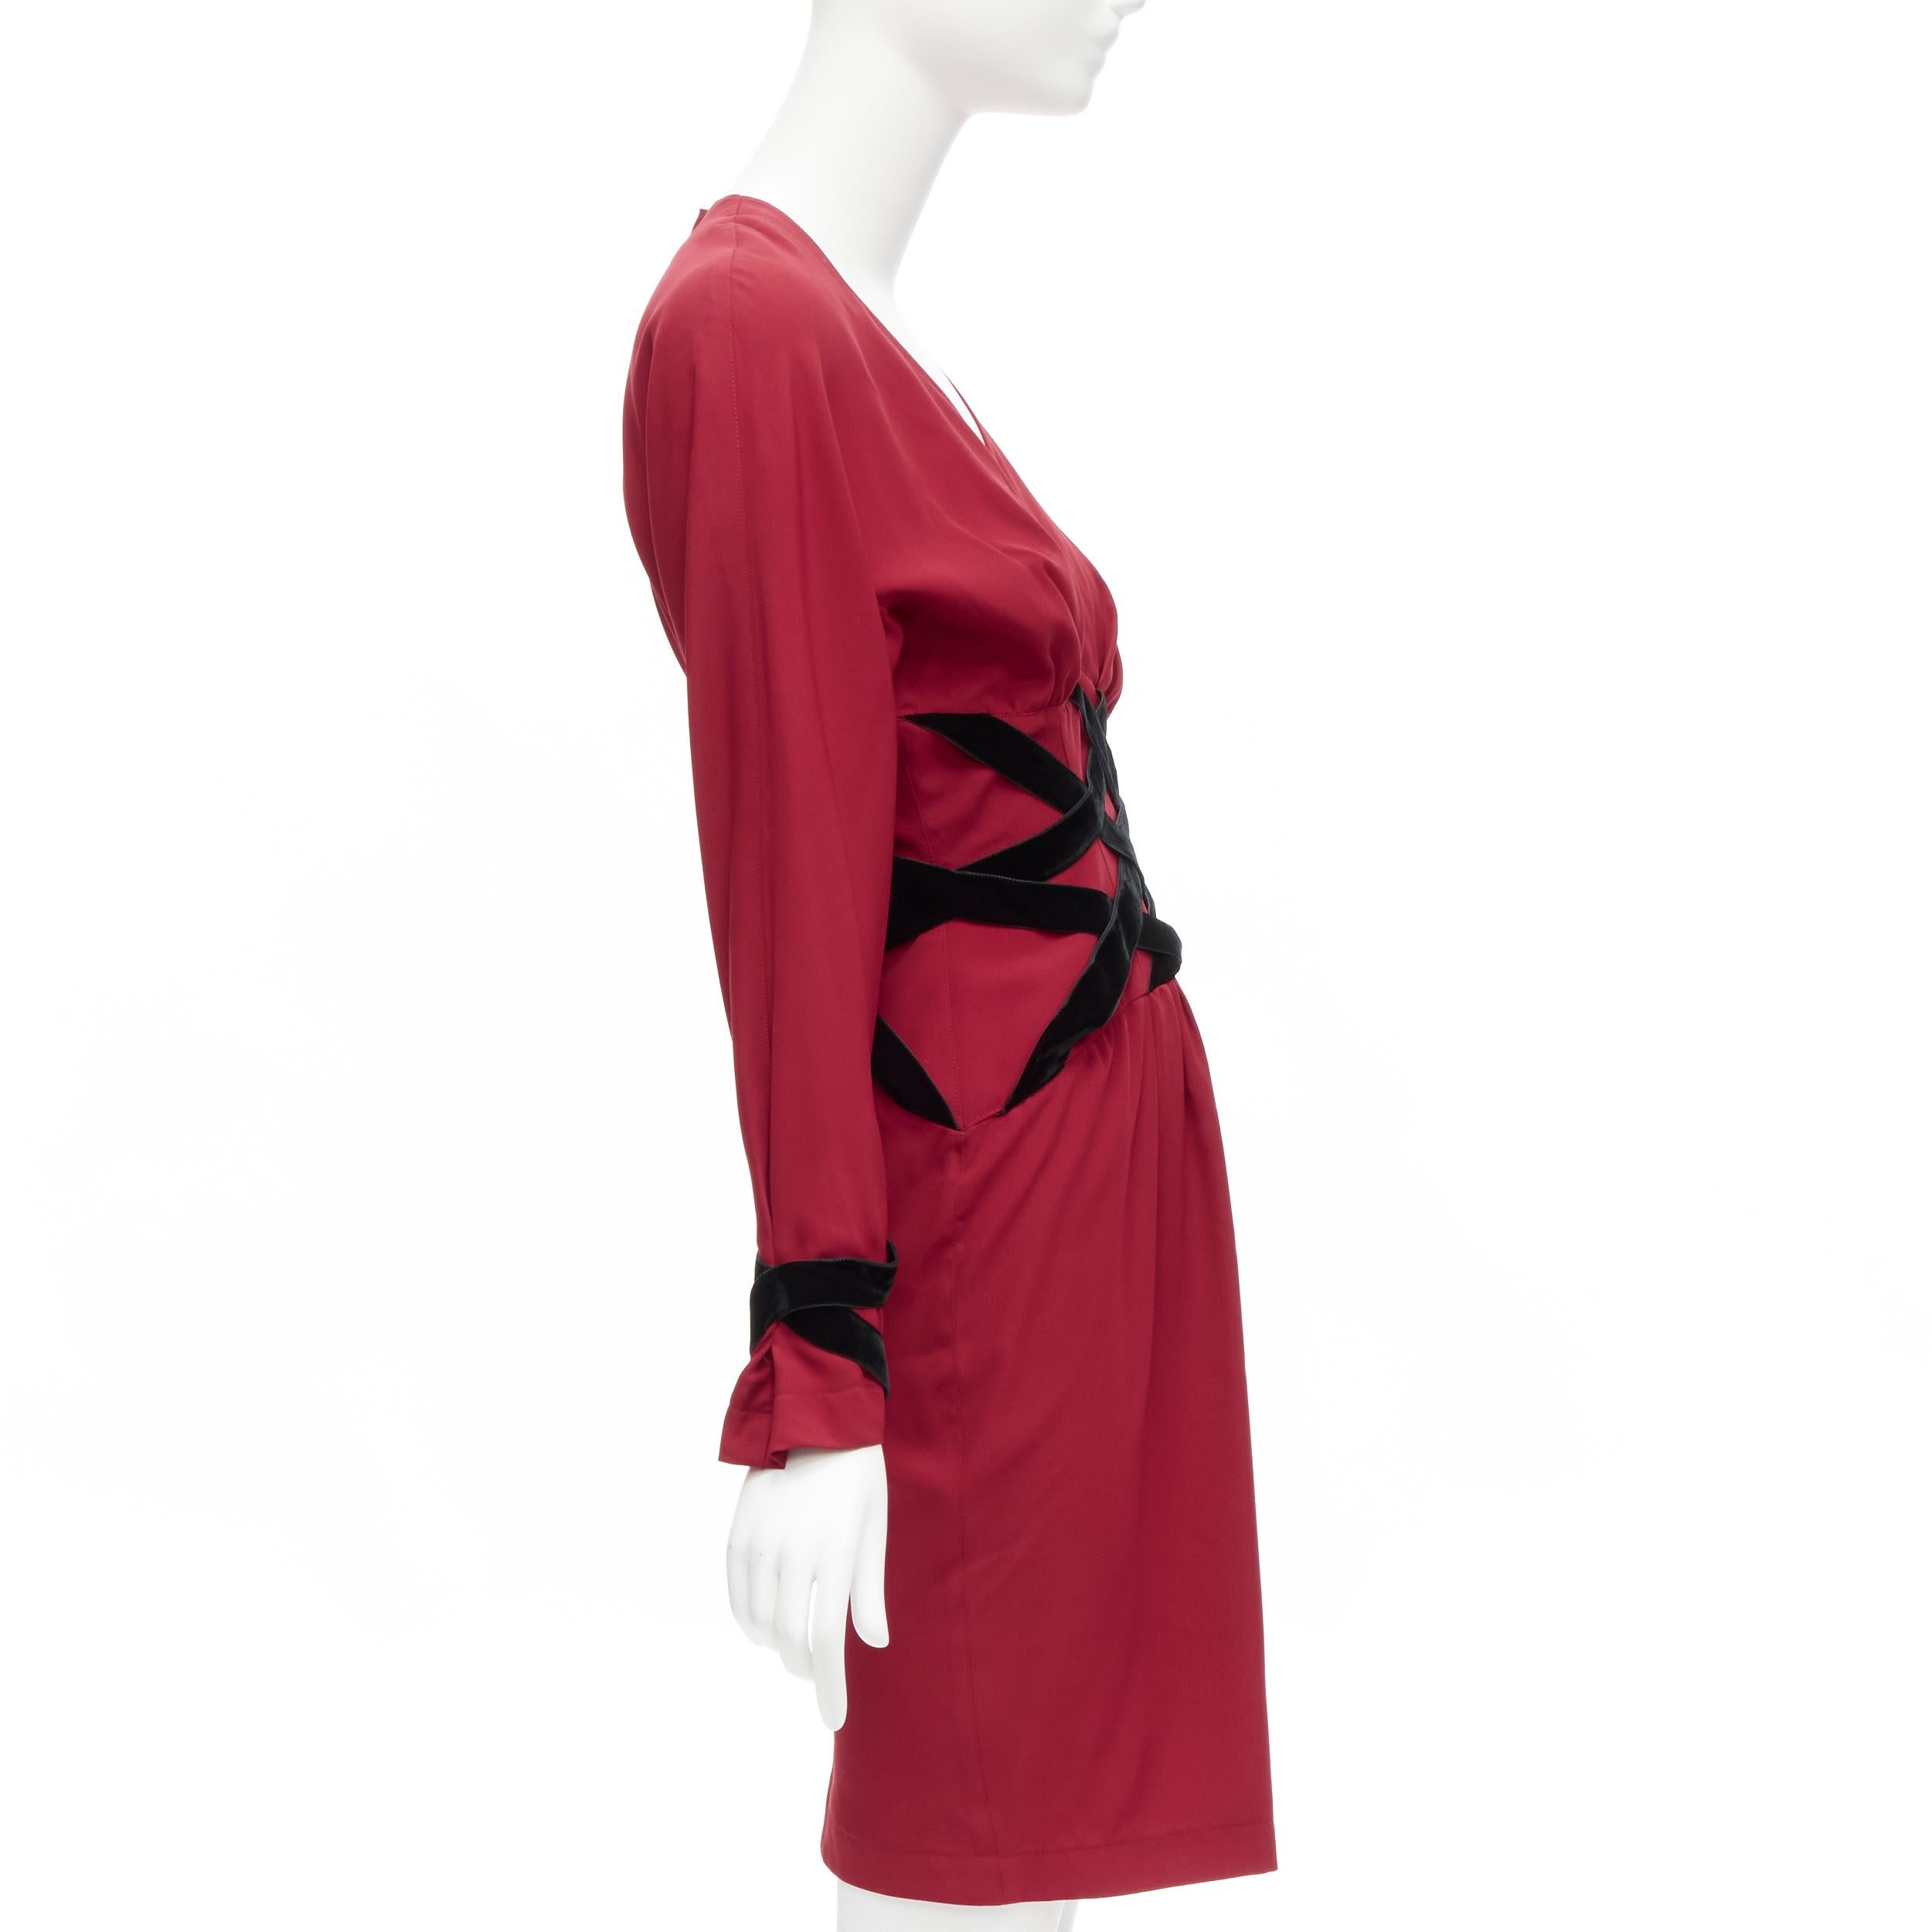 THIERRY MUGLER Vintage velvet crisscross corset  dolman cocktail dress IT7AR S In Excellent Condition For Sale In Hong Kong, NT